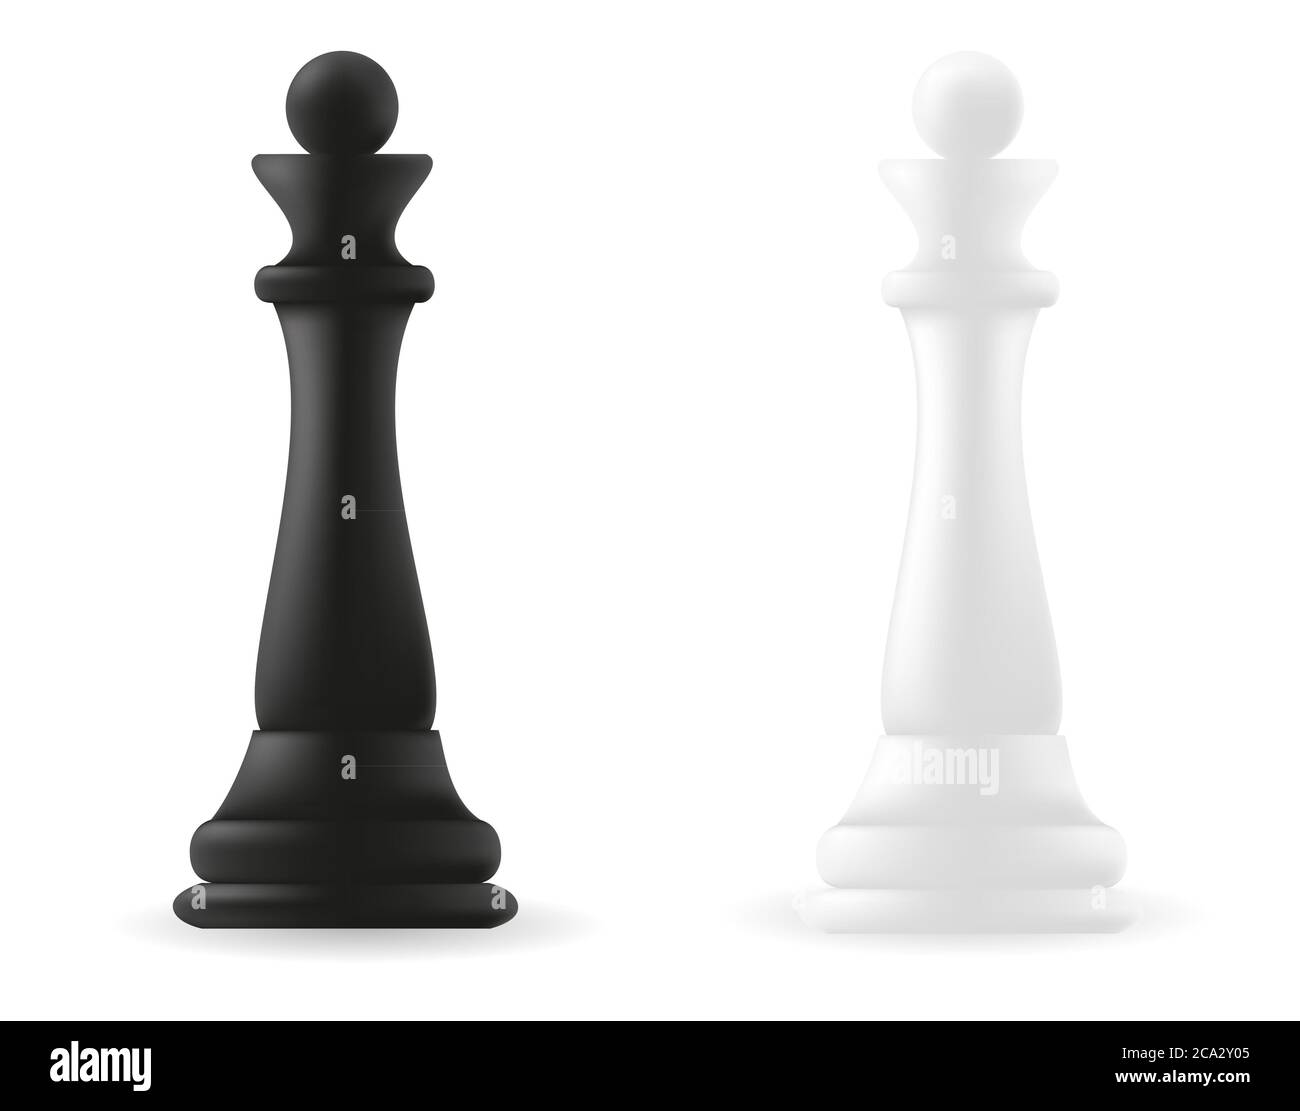 Chess King Piece And Queen Over A White Background Stock Photo, Picture and  Royalty Free Image. Image 52414472.